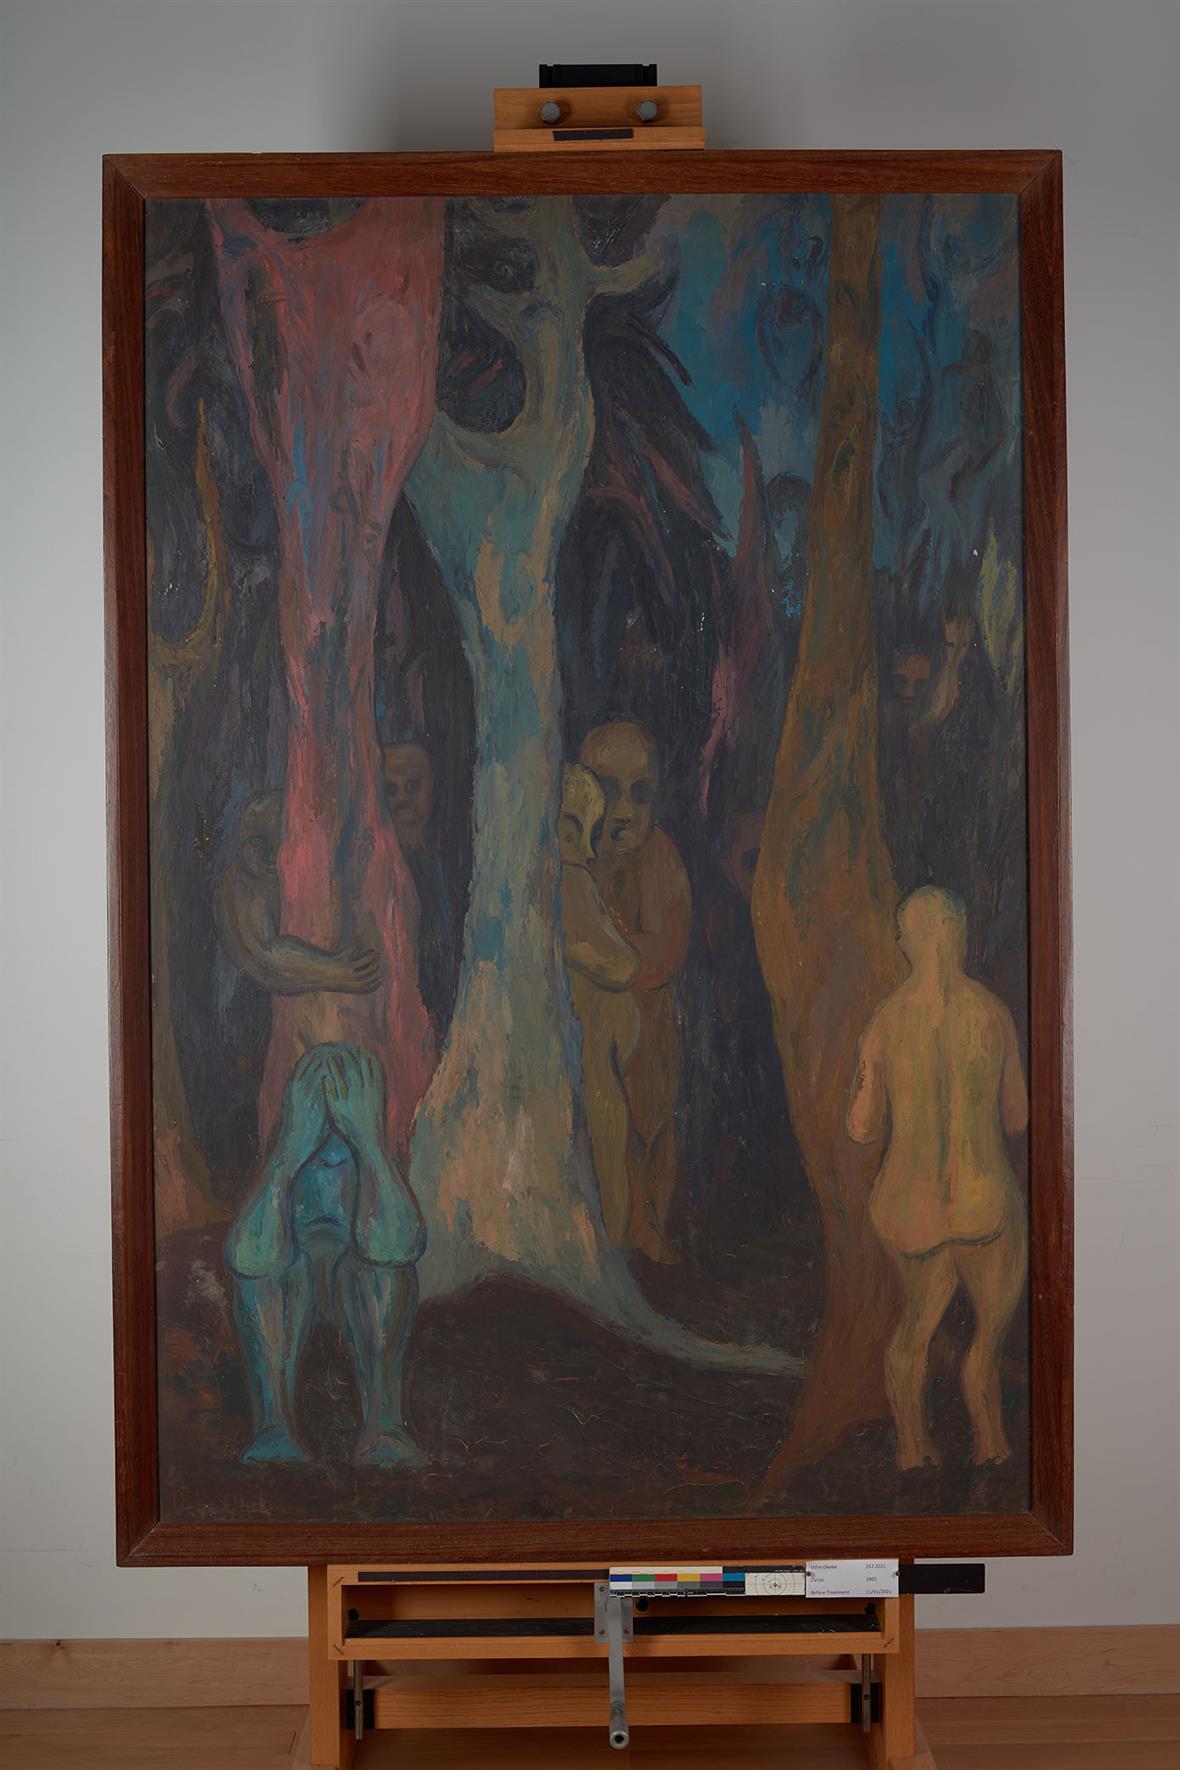 A multicolored painting of figures and trees. The painting is framed and sitting in an artist's easel.